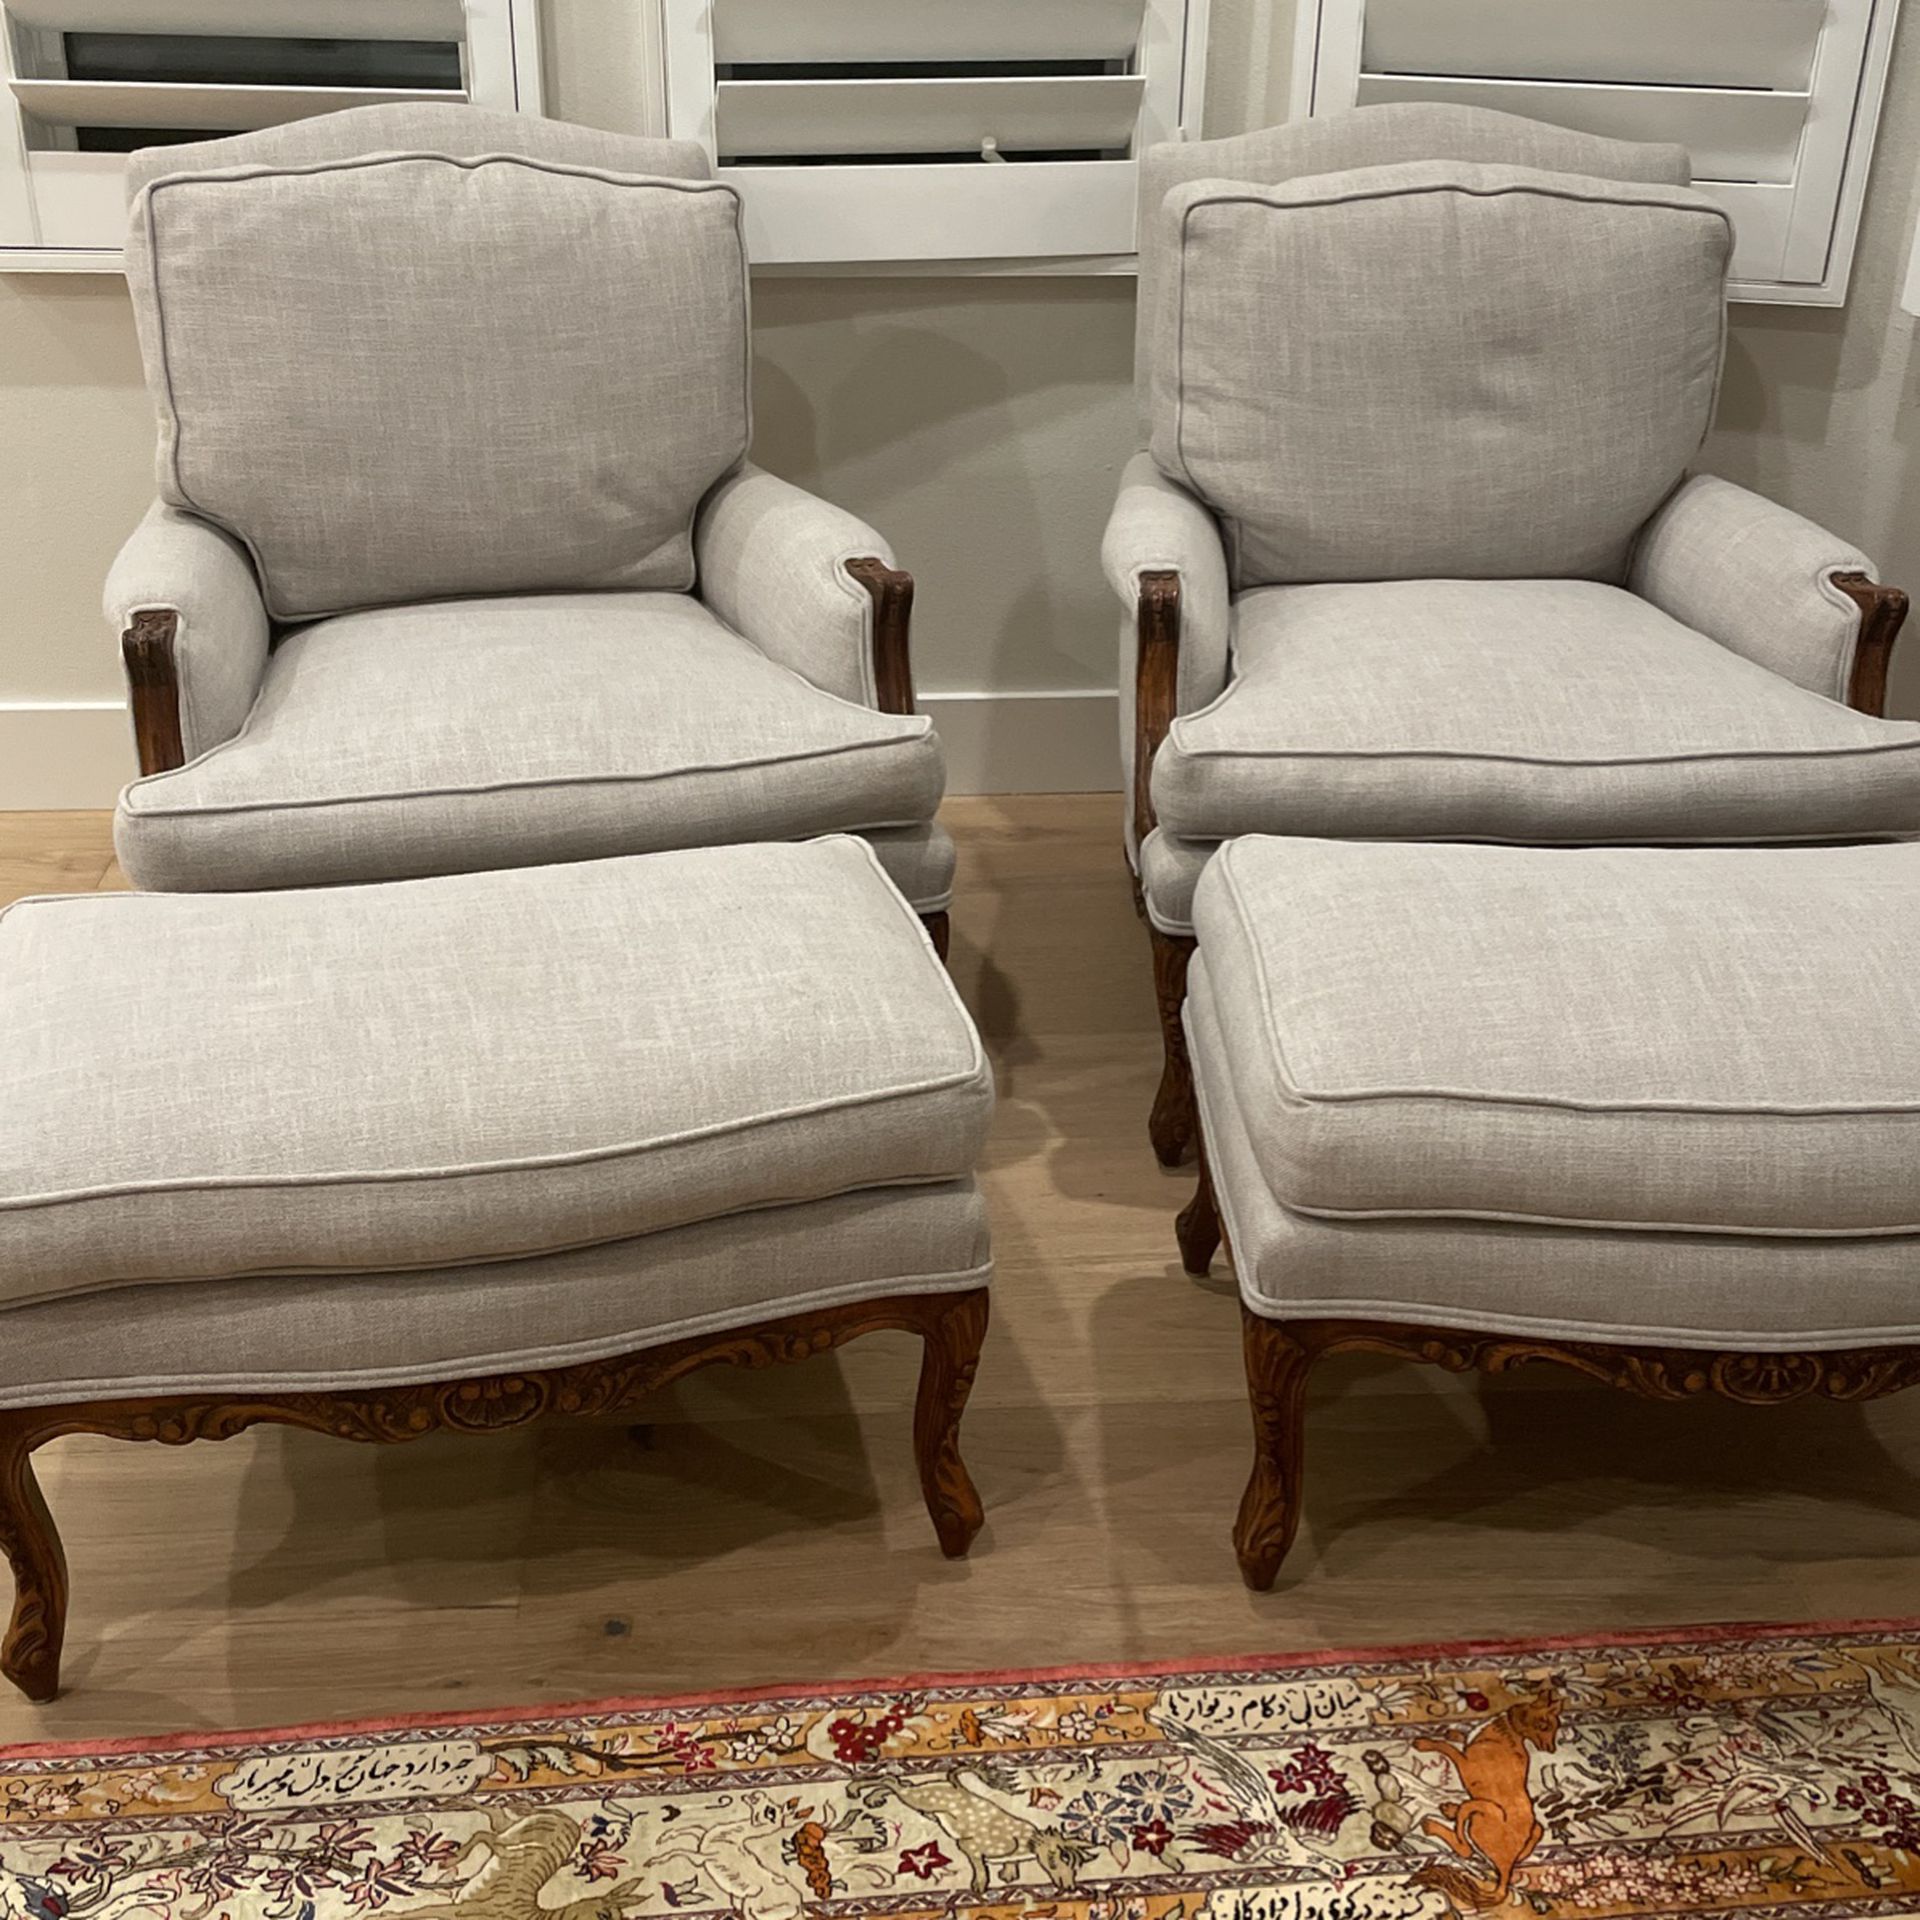 Berger Chairs With Ottoman & Cherry Wood Legs